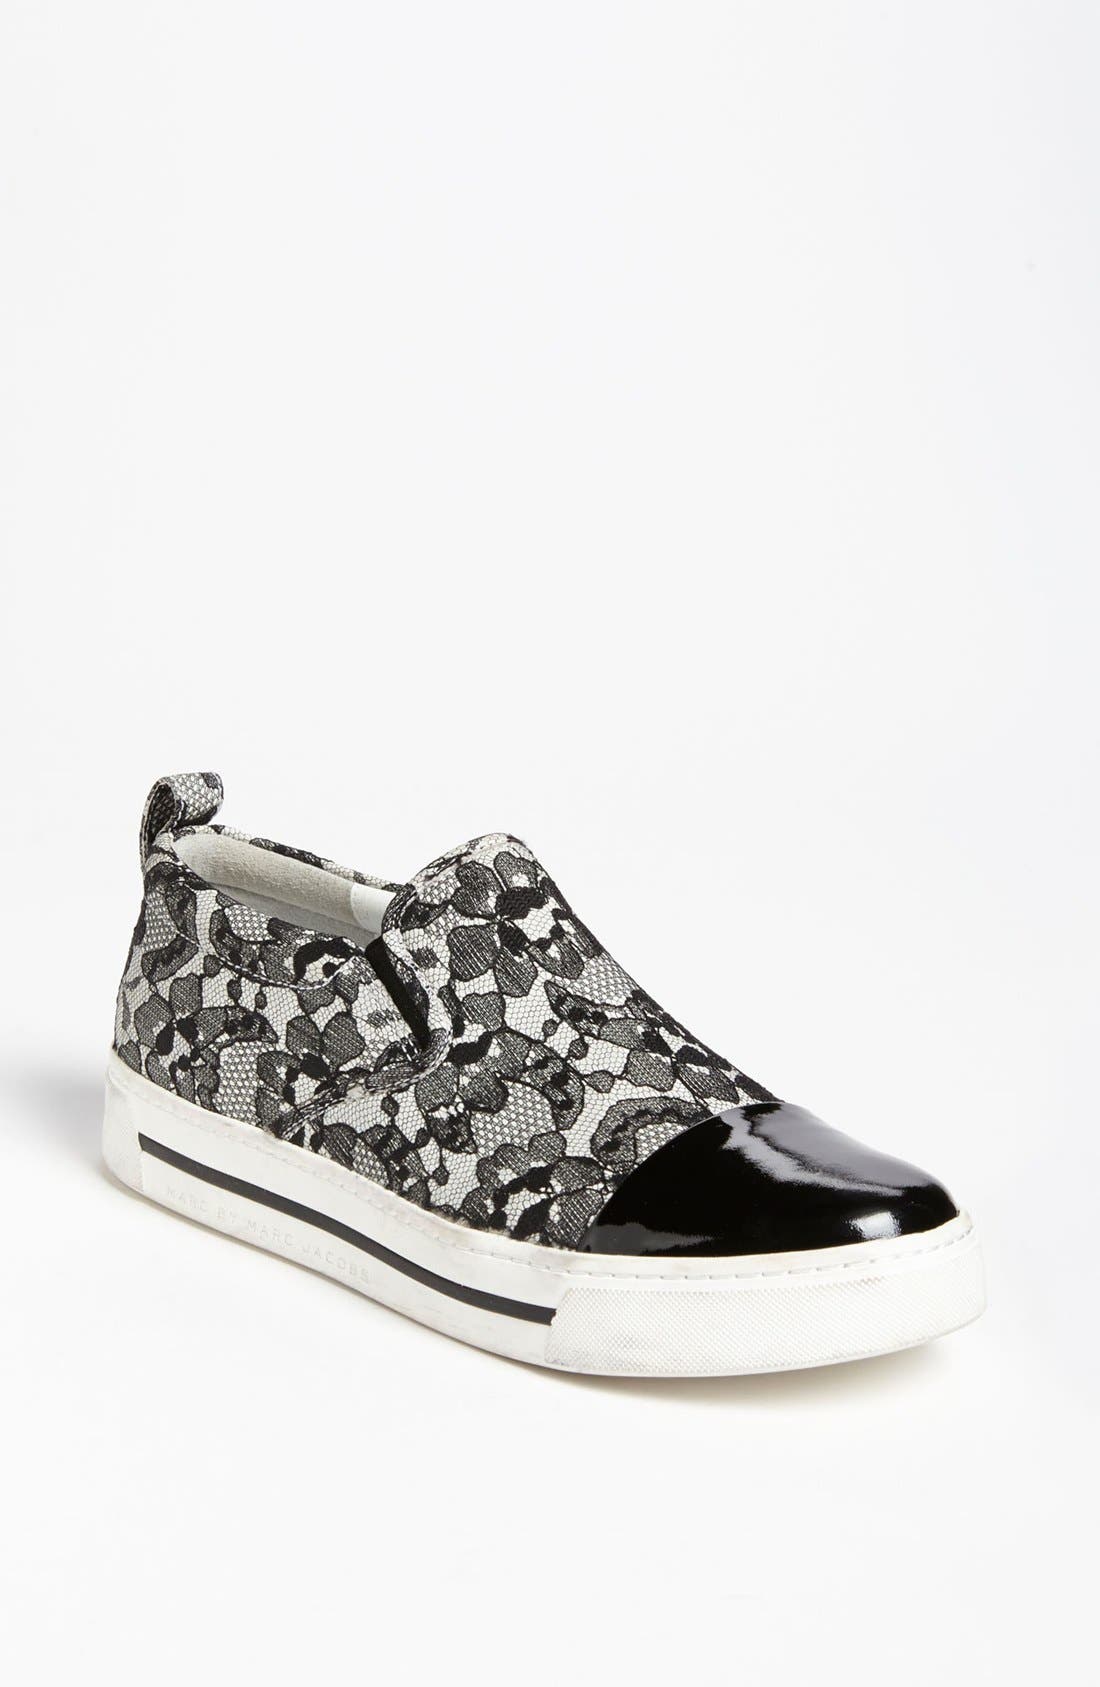 MARC BY MARC JACOBS Sneaker | Nordstrom